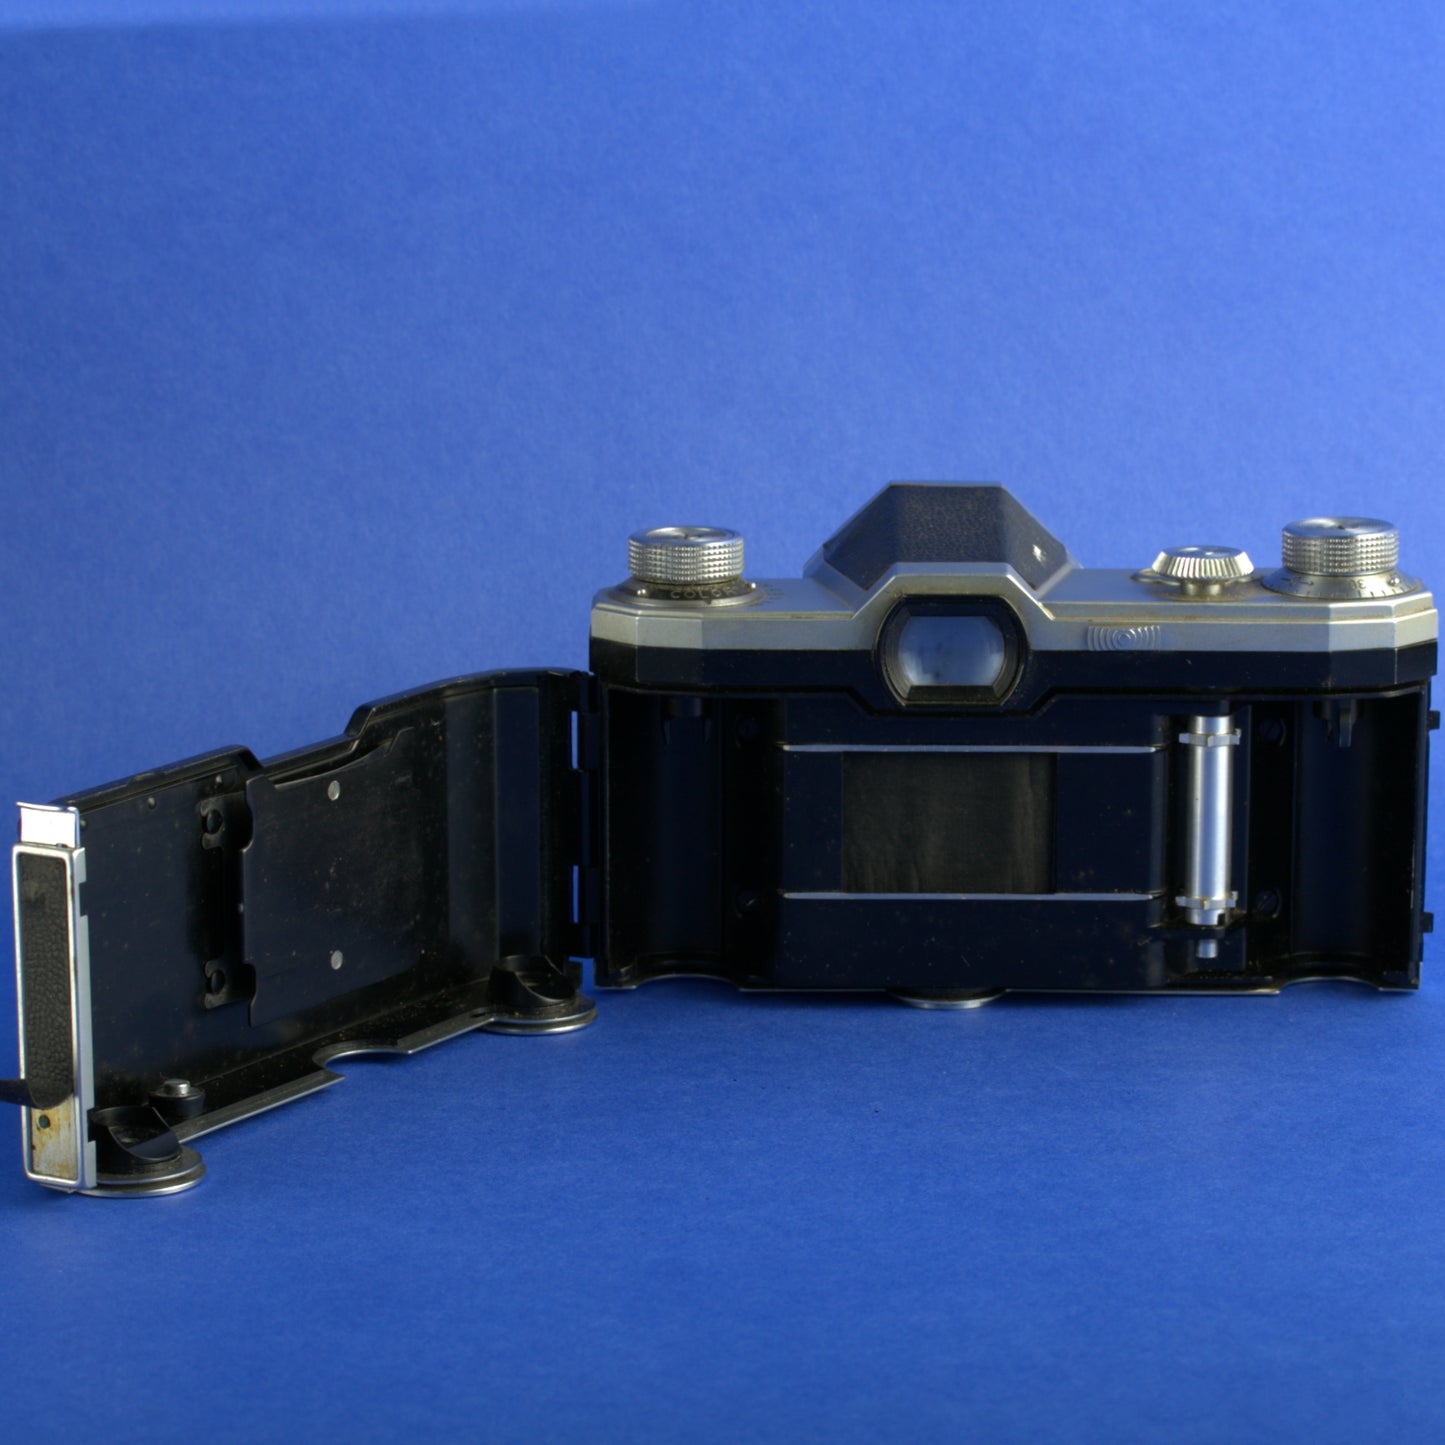 Contax S Film Camera with Biotar Lens Not Working